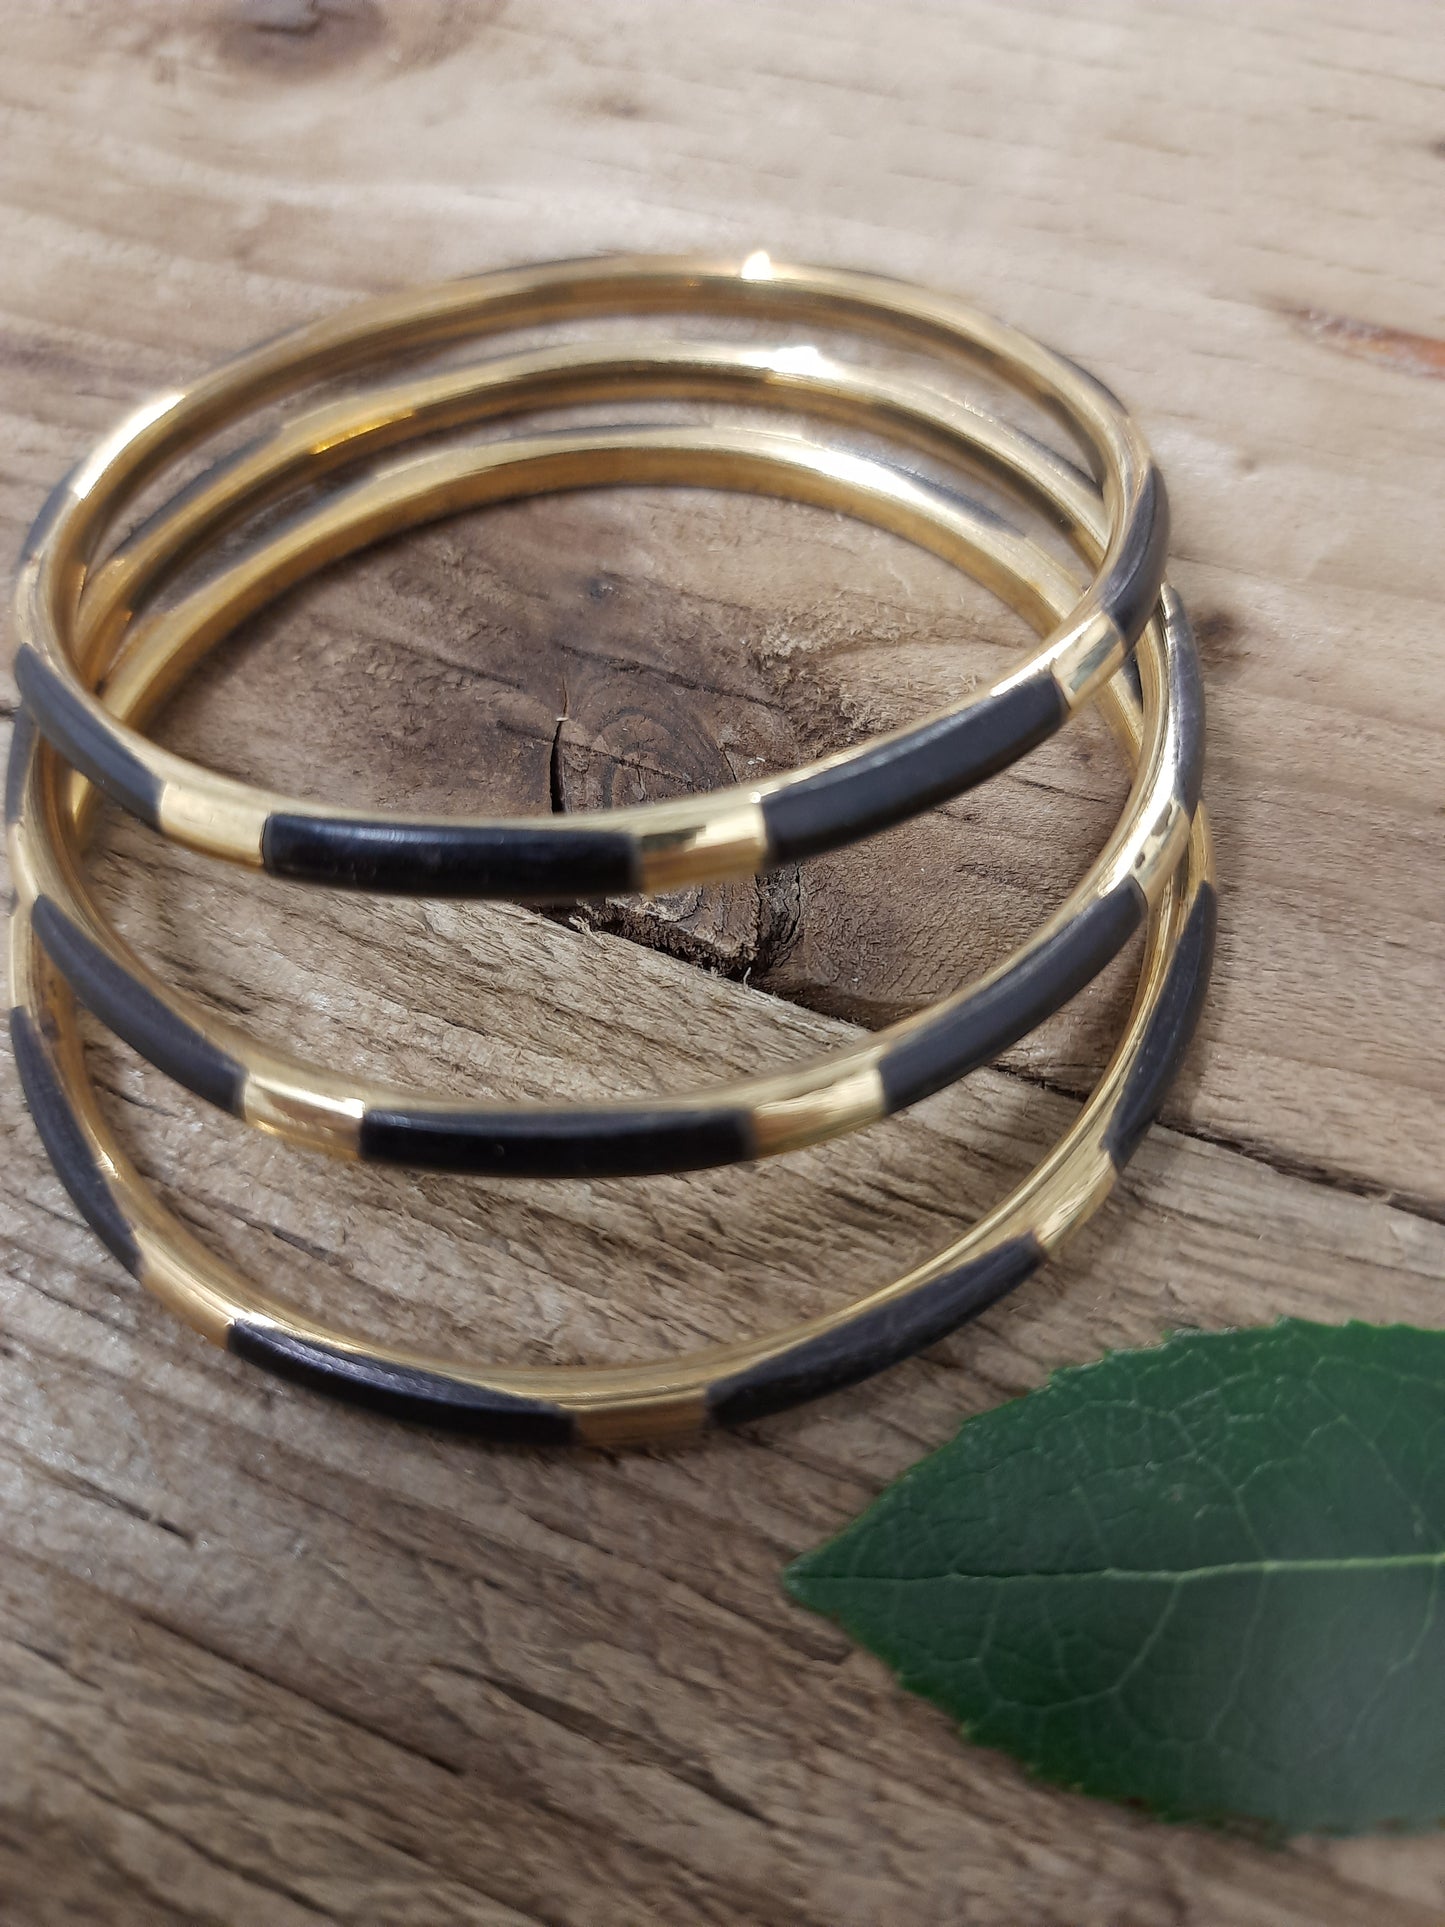 Ethical Jewellery UK | Set of 3 | Black in Colour | Fair Trade Products | Ethical Store